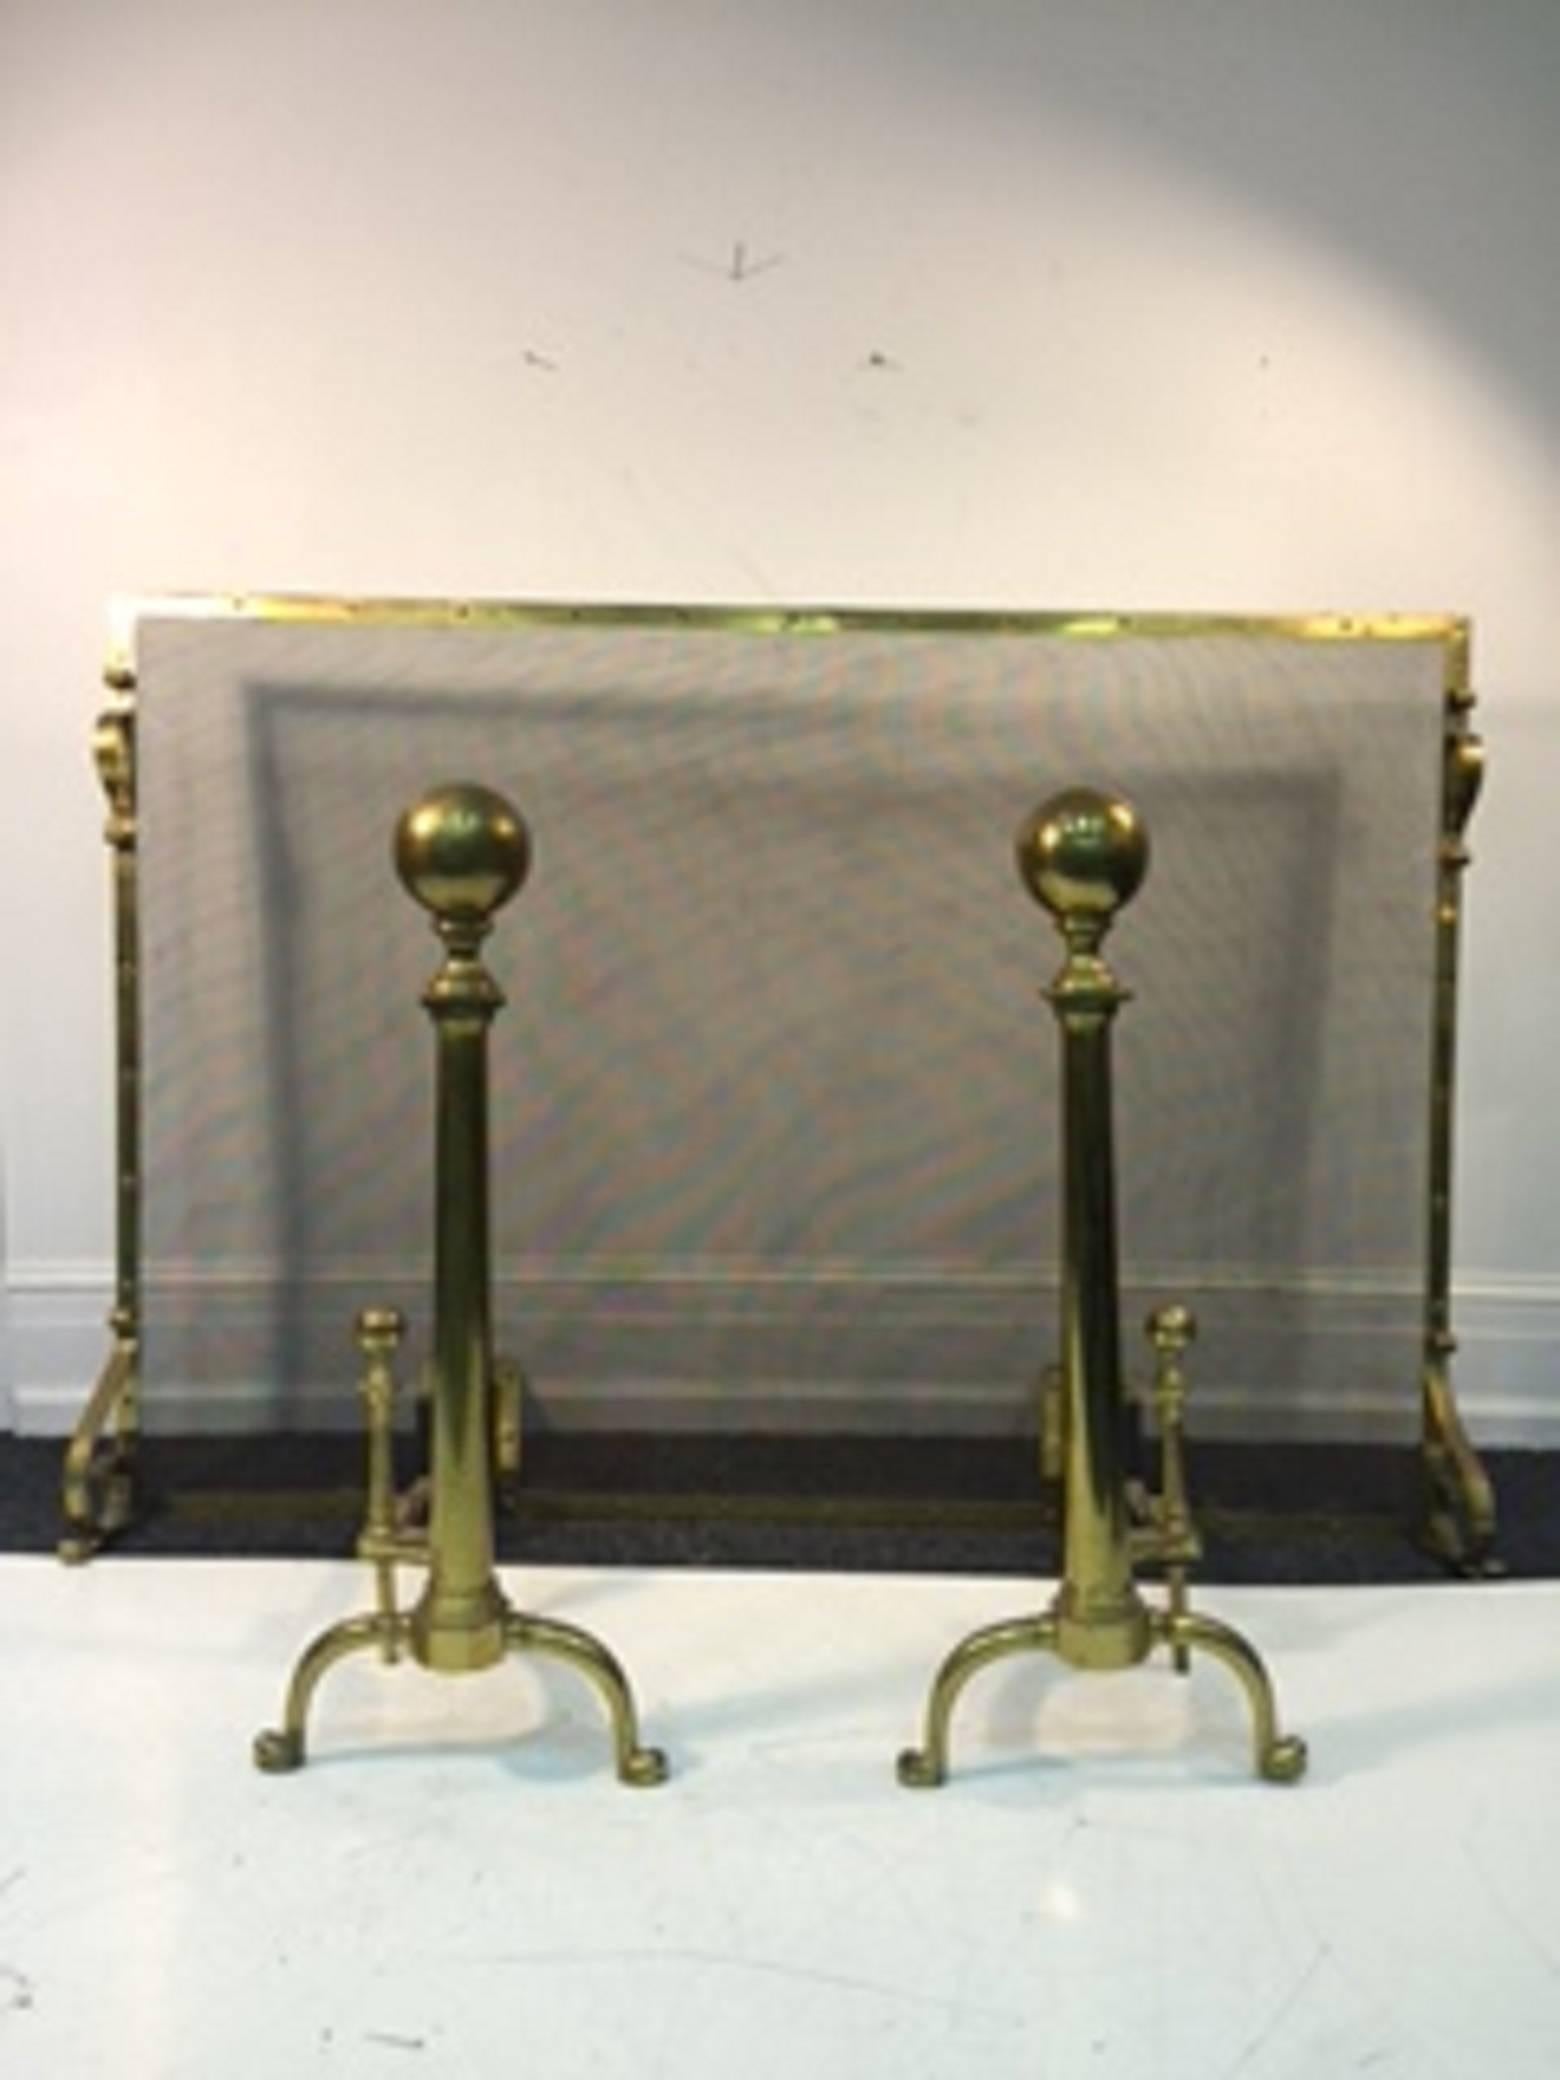 An exceptional, giant, American fire screen with brass ball-top andirons.
Measures:
Andirons: 35 H x 14 W.
Fire screen: 63 H x 43.5 W.